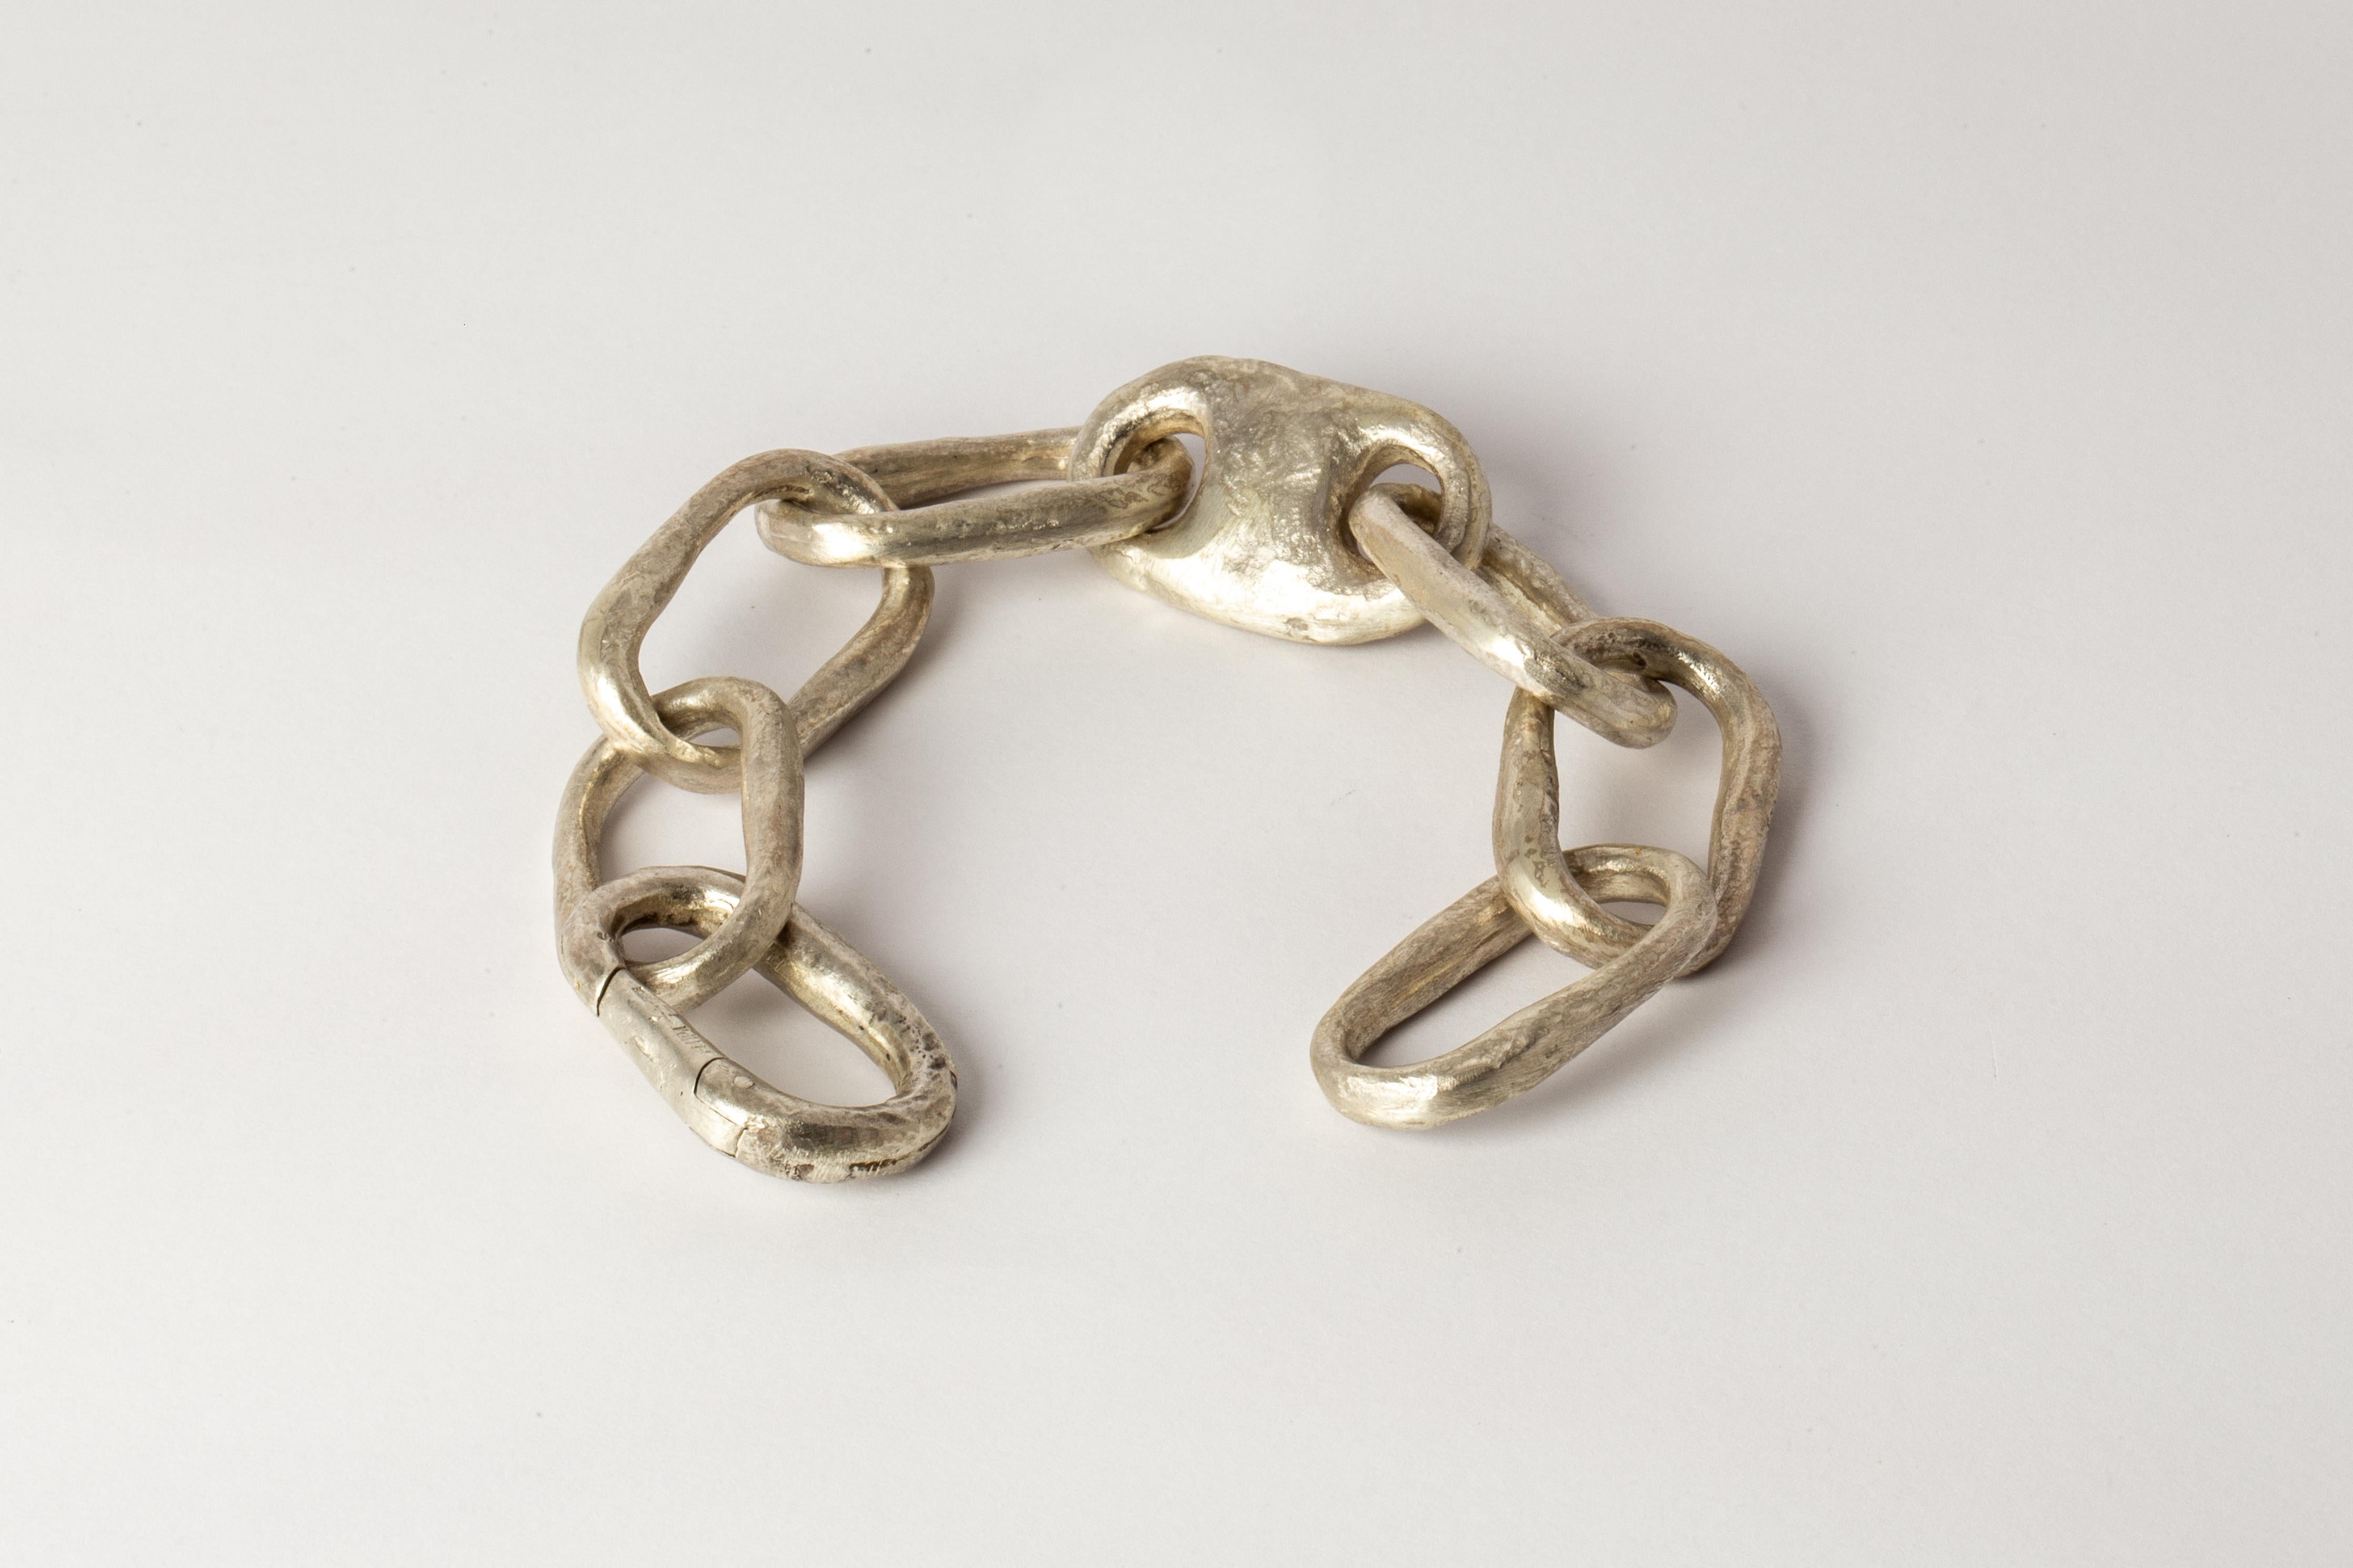 Roman Small Link Bracelet w/ Small Closed Link (MA) In New Condition For Sale In Hong Kong, Hong Kong Island